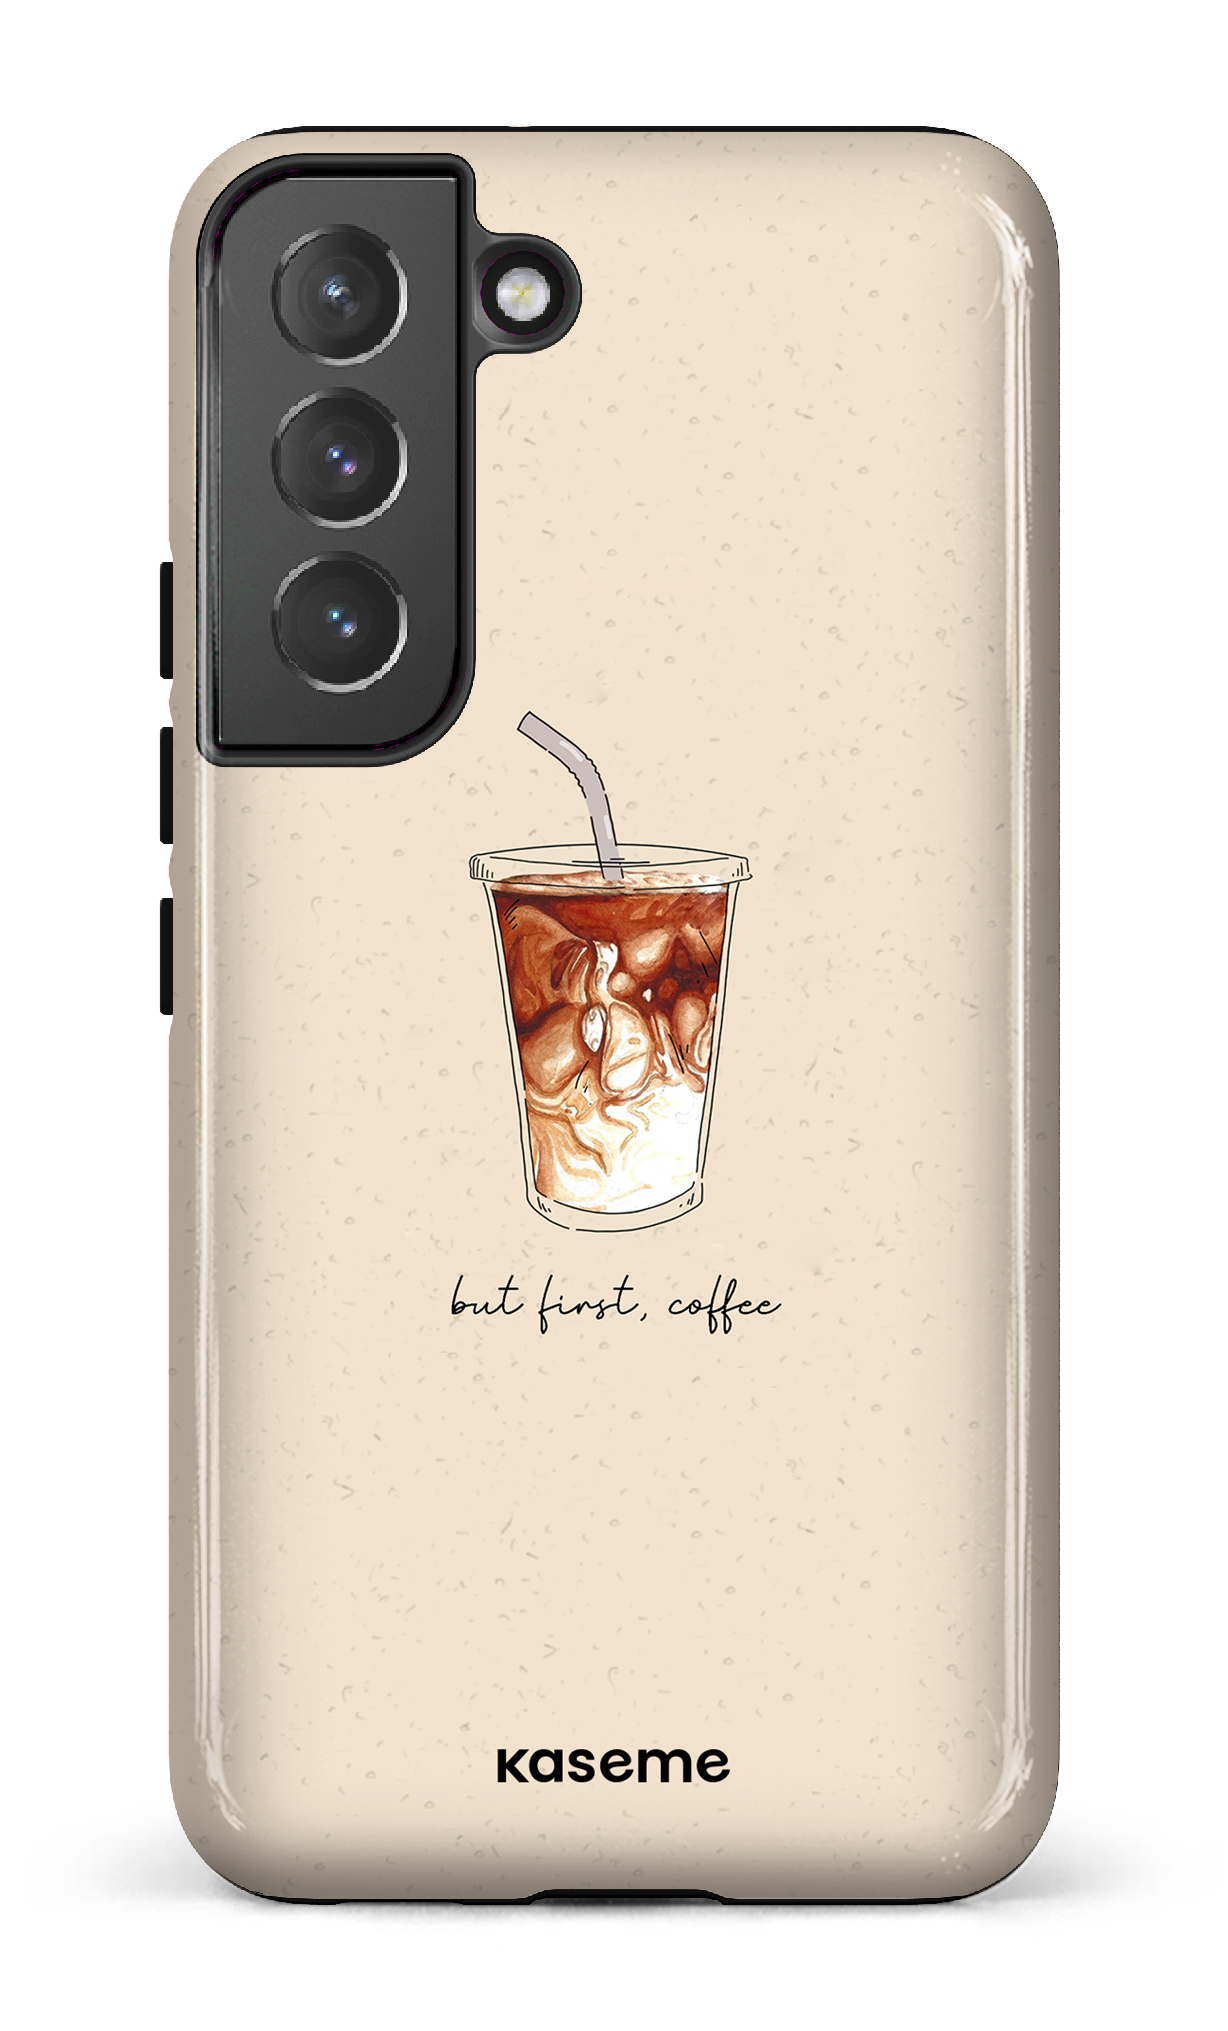 But first, coffee - Galaxy S22